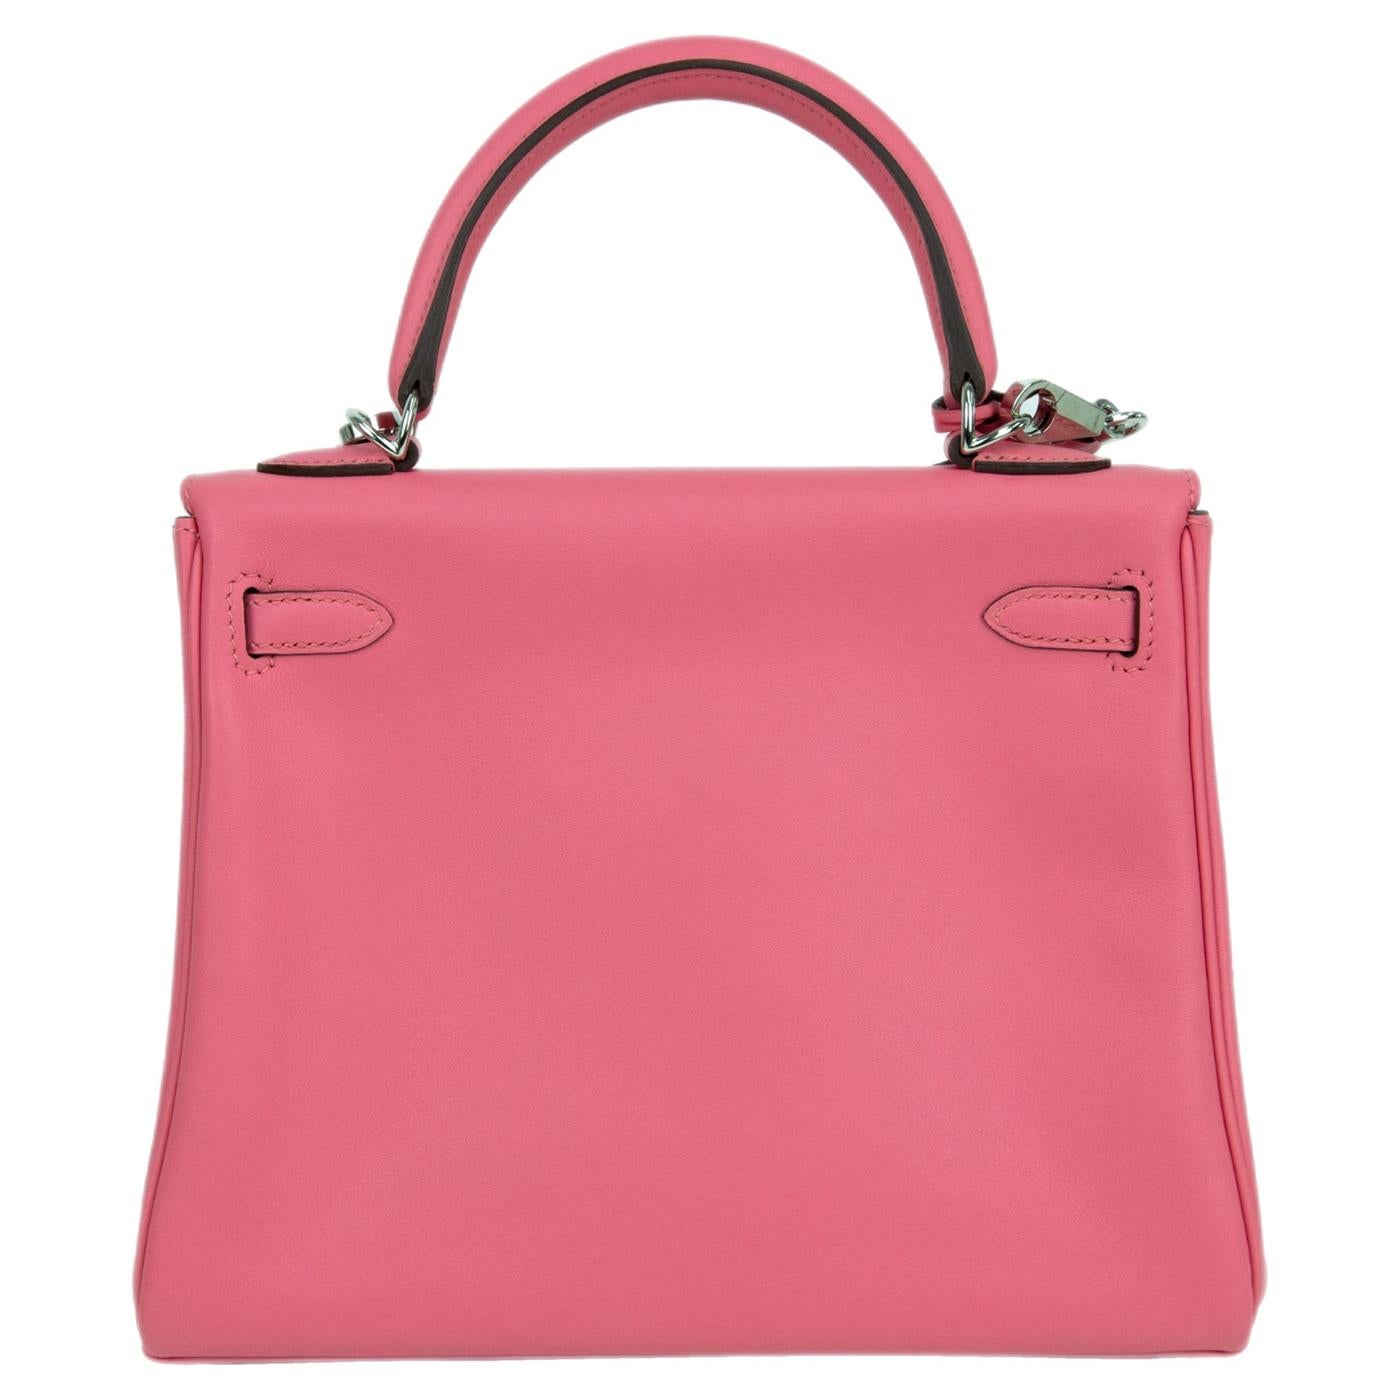 Hermes Kelly 25 Retourne Pink Azalee Swift Leather Pink Azalee In New Condition For Sale In Aventura, FL